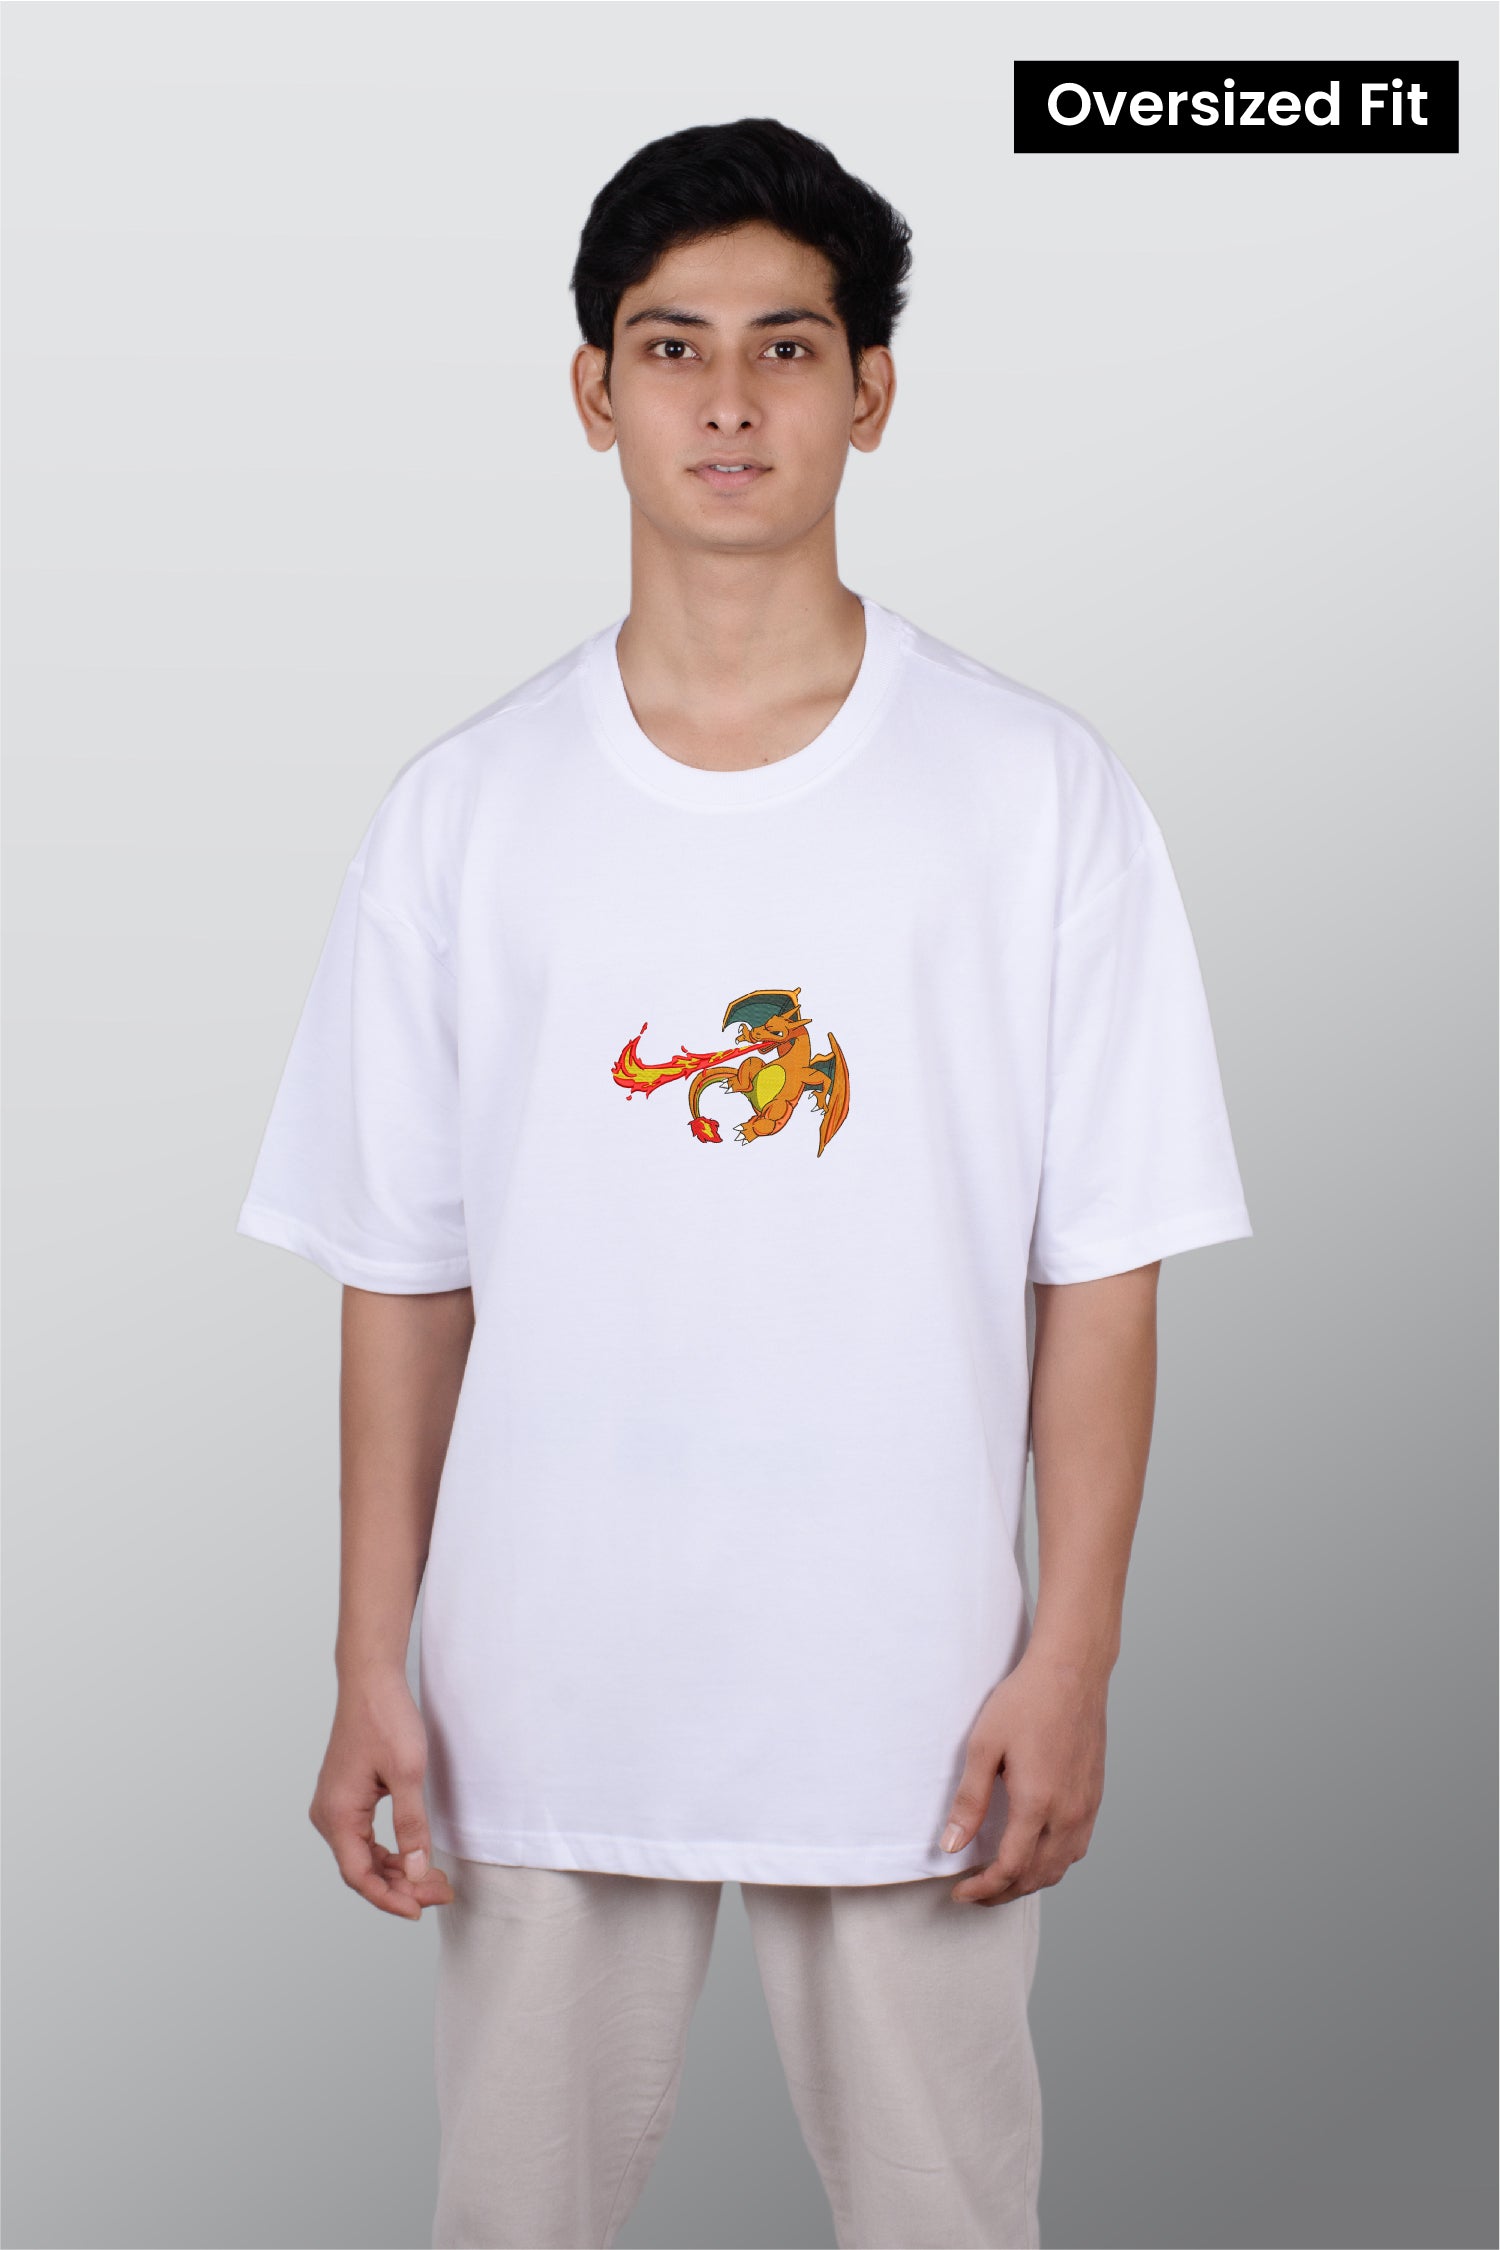 Charlizard Embroidered T-shirt